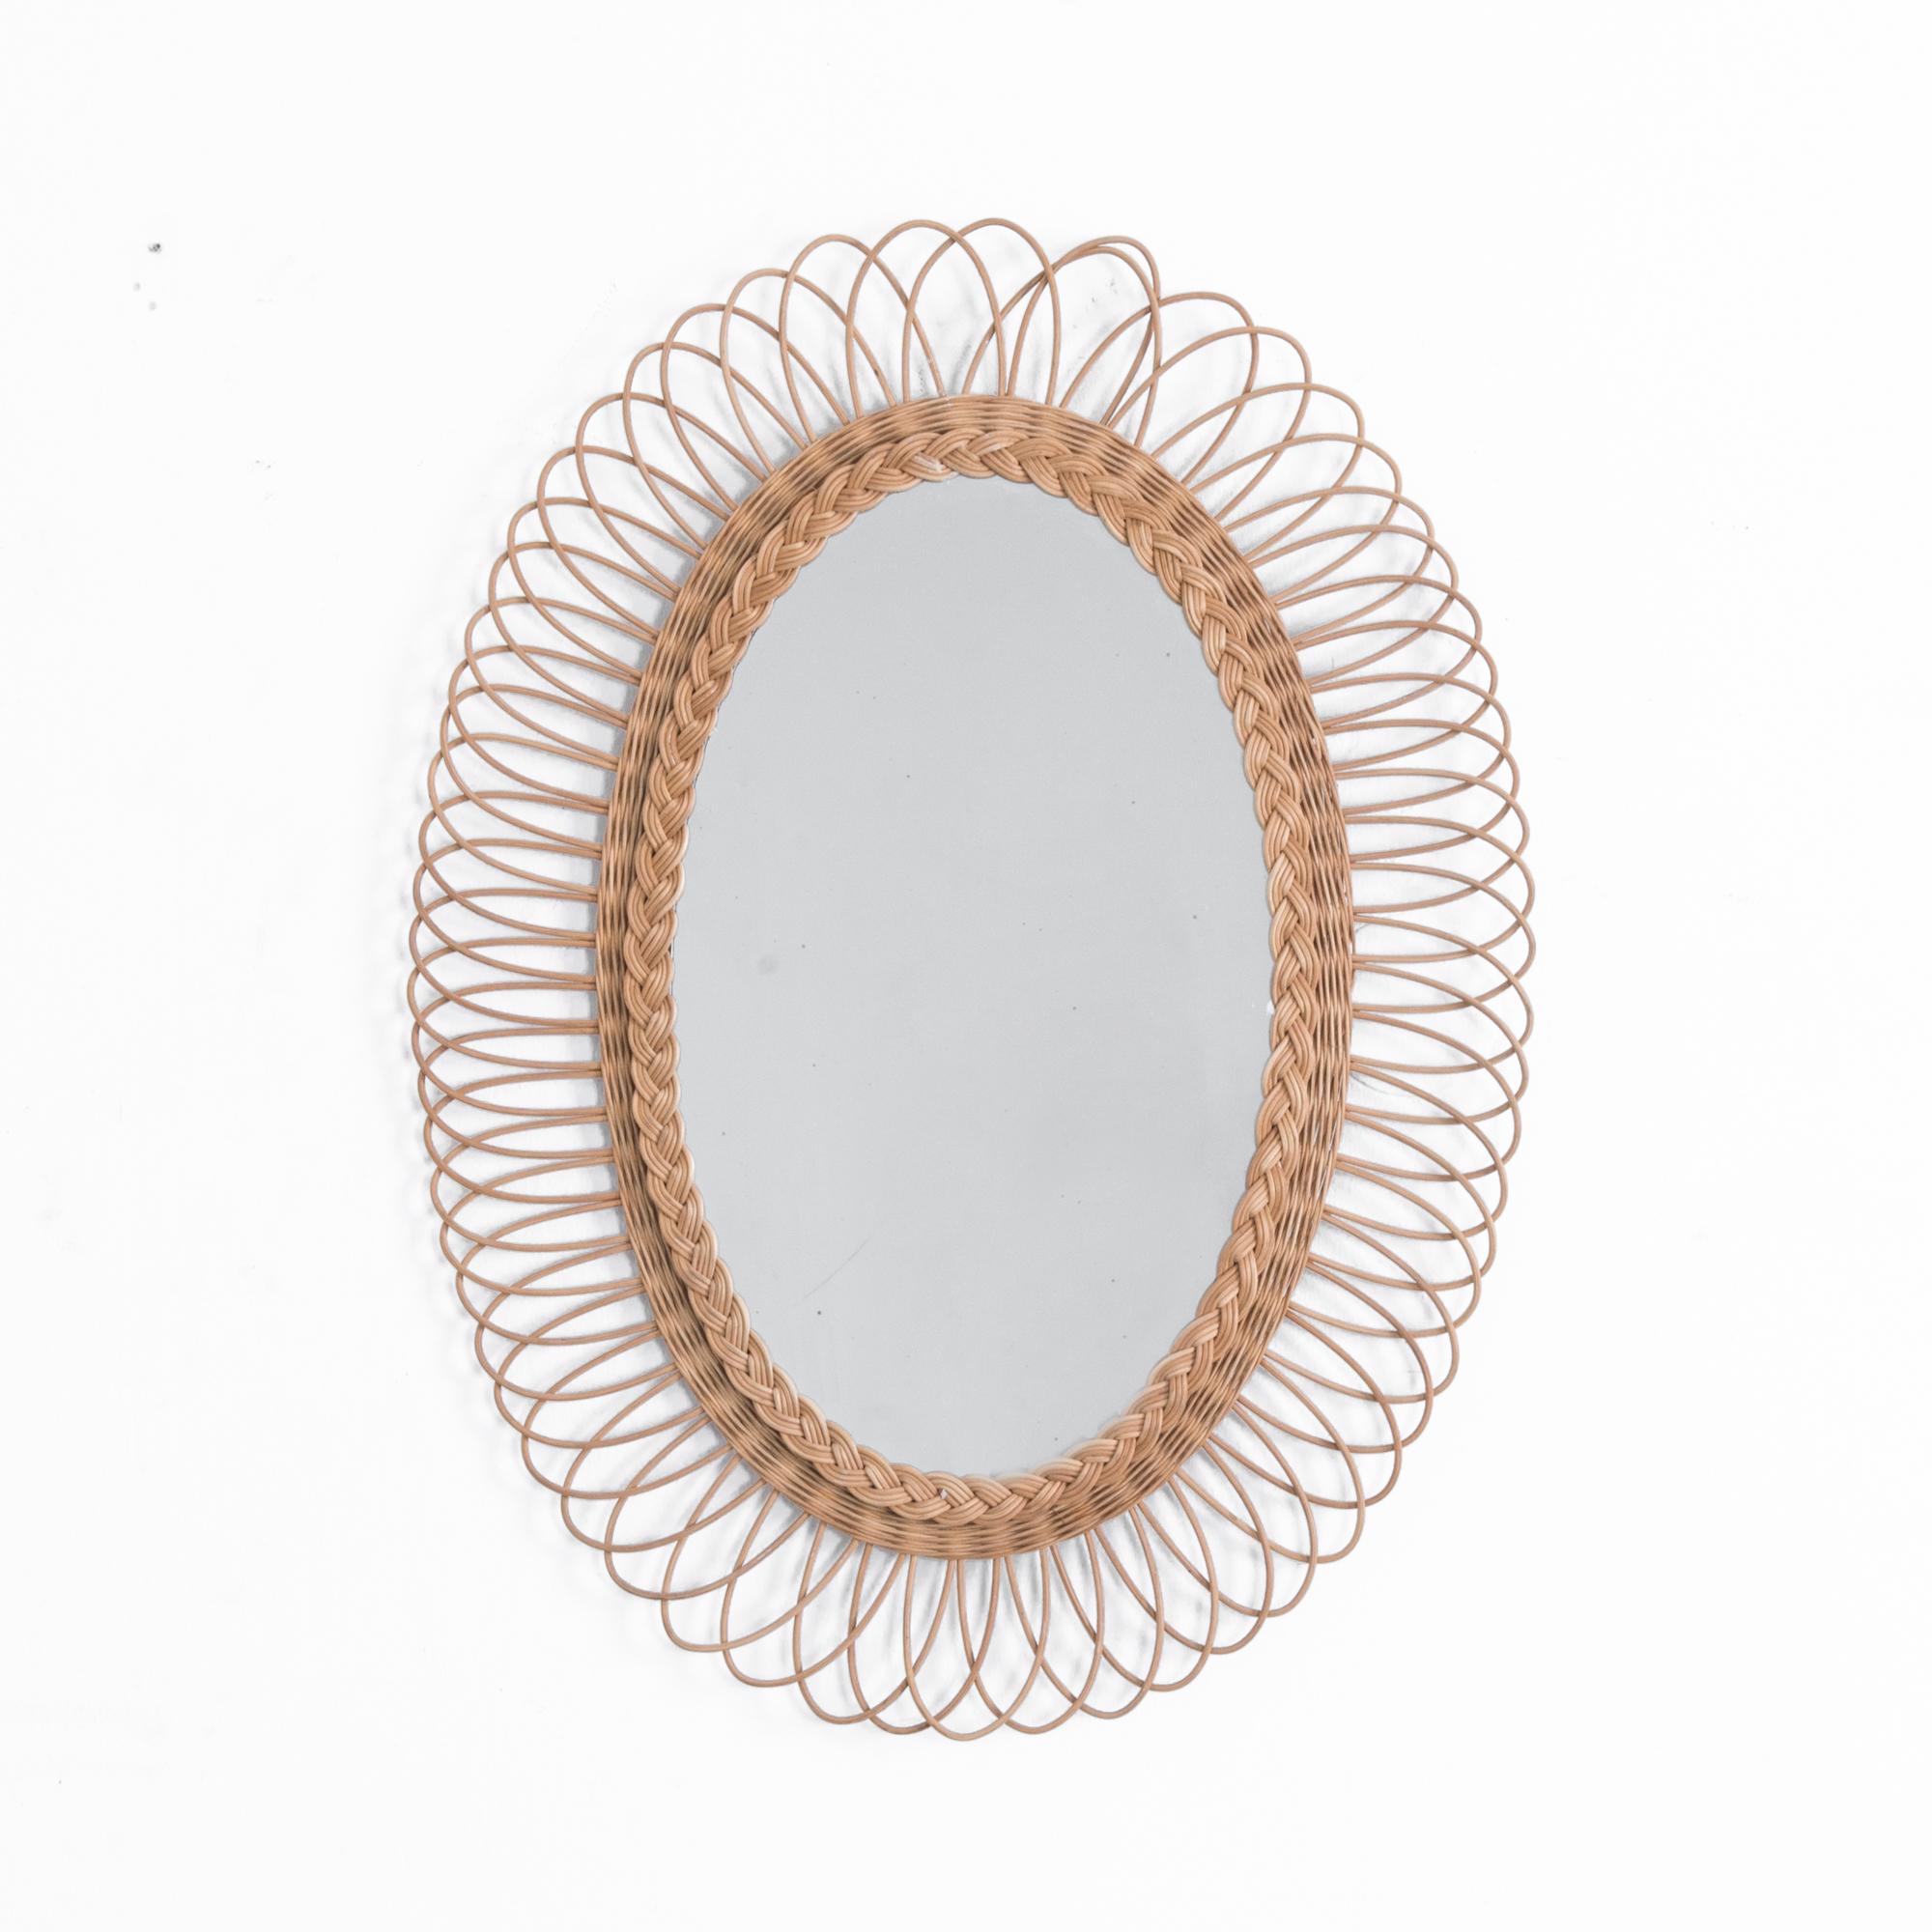 A retro throwback, this French 1970s mirror has a prominent oval shape, rendered in pleasant warm rattan. Surviving the unforgettable epoch of 1970s fashion, this woven beauty is ready to make a splash in a contemporary interior. Adding a great note